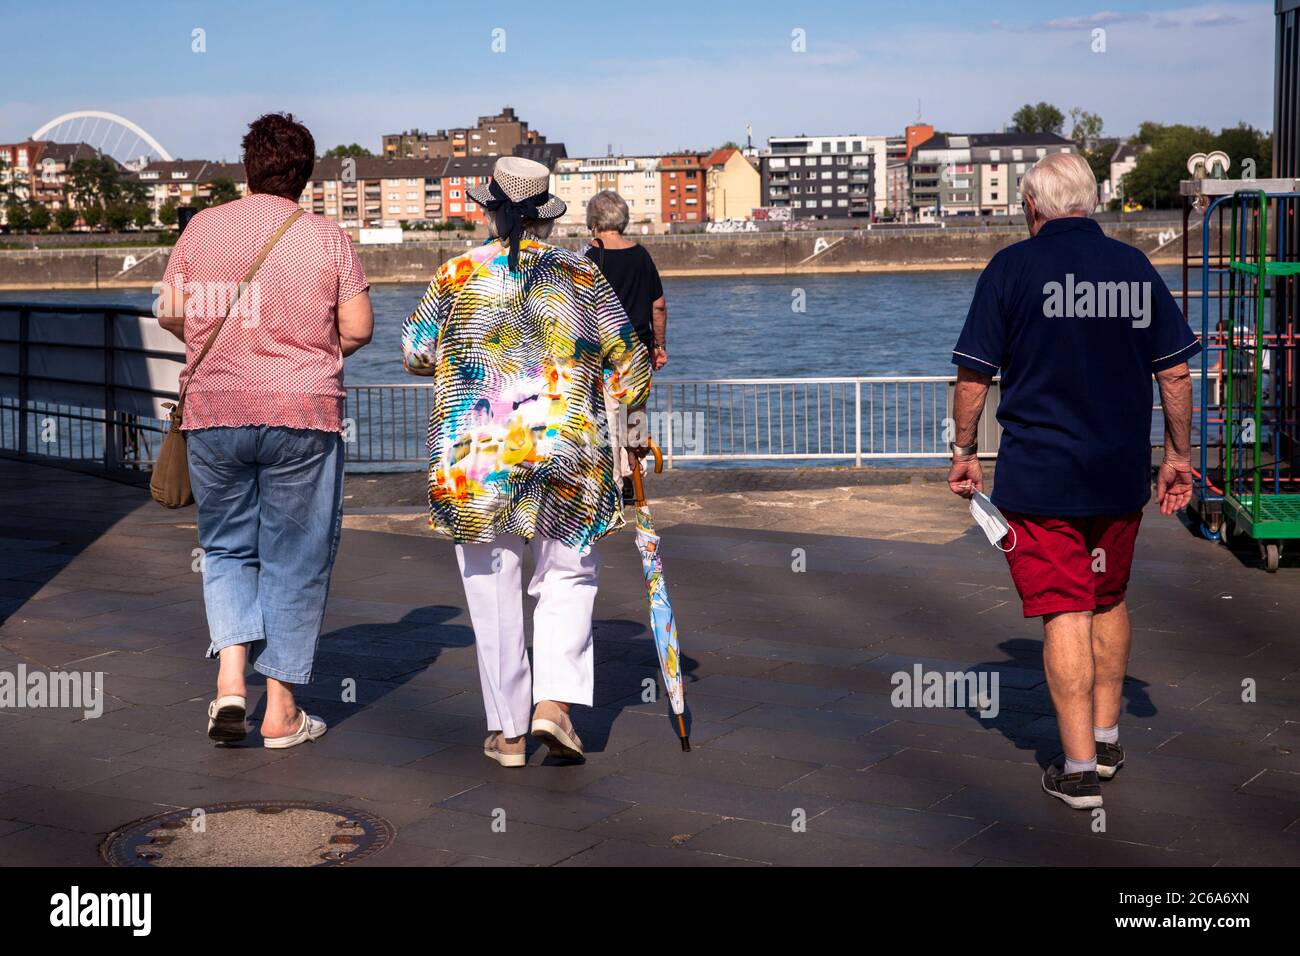 woman in colorful blouse with hat and umbrella walks with companions through the Rheinau harbor, Cologne, Germany  Frau in bunter Bluse mit Hut und Re Stock Photo